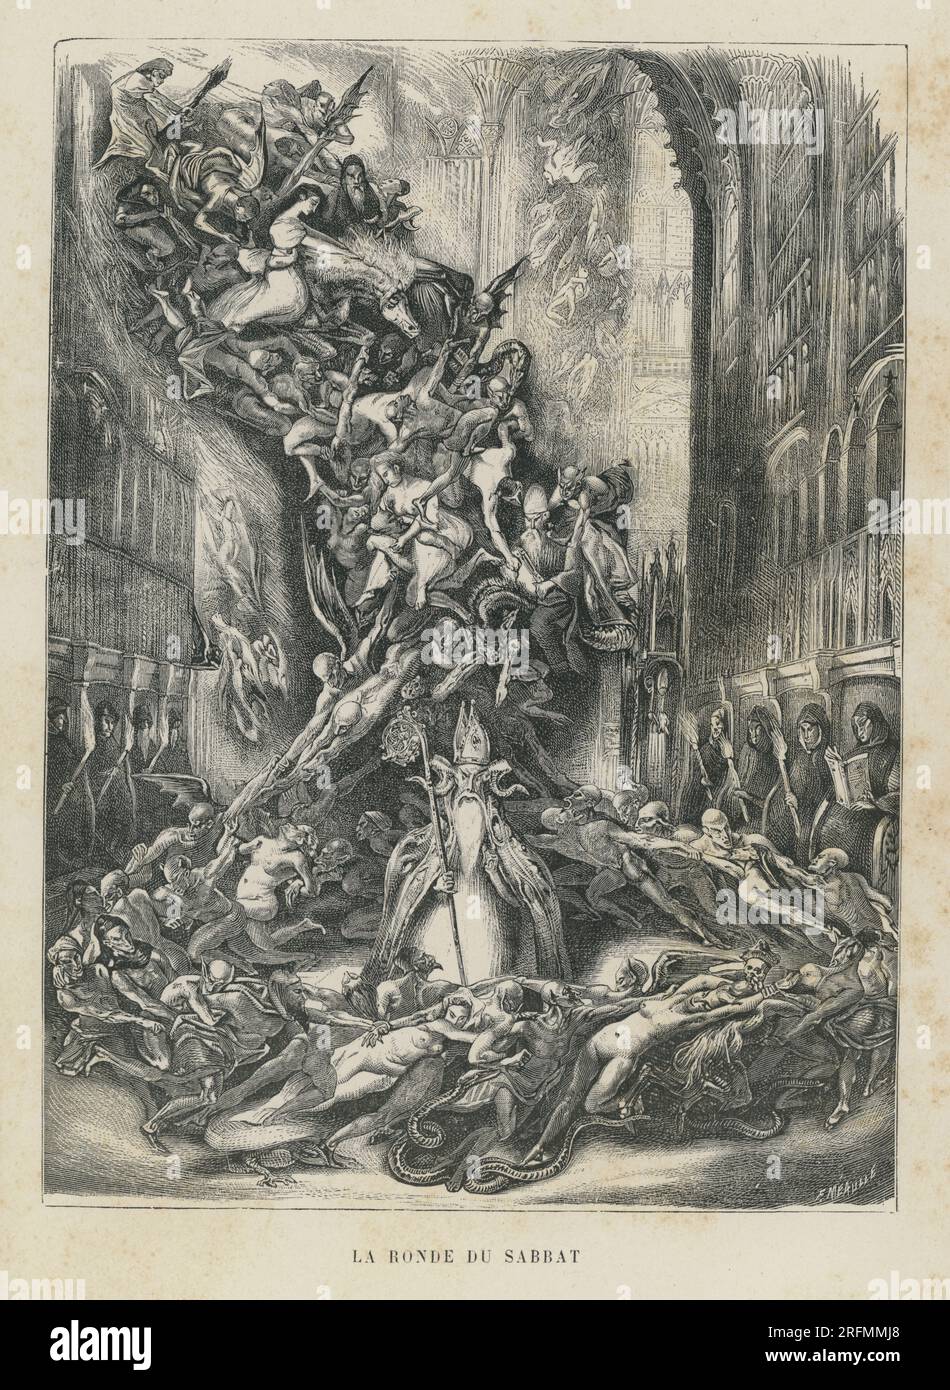 Illustration of "Odes et Ballades" illustrating the poem "La ronde du sabbat".  Illustrator: Louis Boulanger. Illustration from 'Oeuvre poétique' (vol. I) and part of a set of engravings published in the Volume XII of Victor Hugo's 'Oeuvres Complètes'. Book published by the Société anonyme de publications périodiques P. Mouillot. Stock Photo